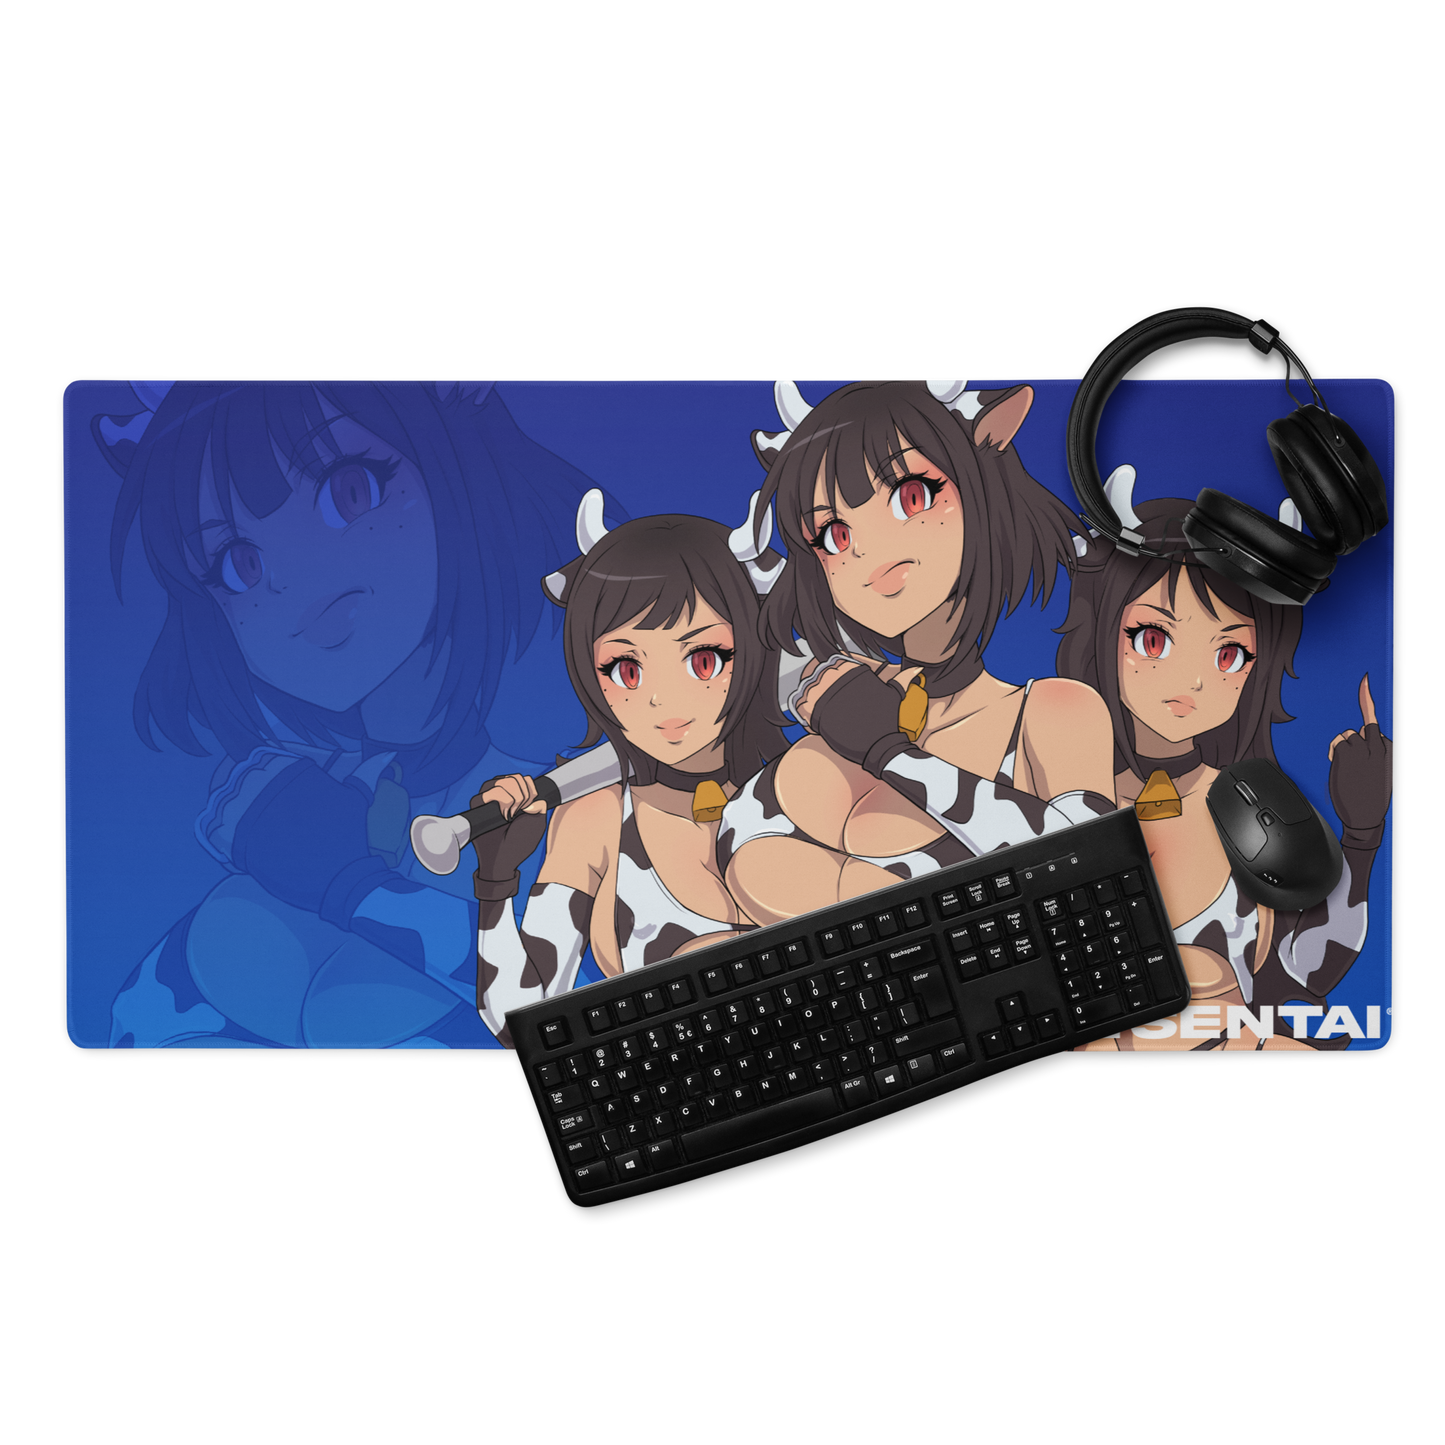 MAD-COWS DESK MAT GAMING MOUSE PAD